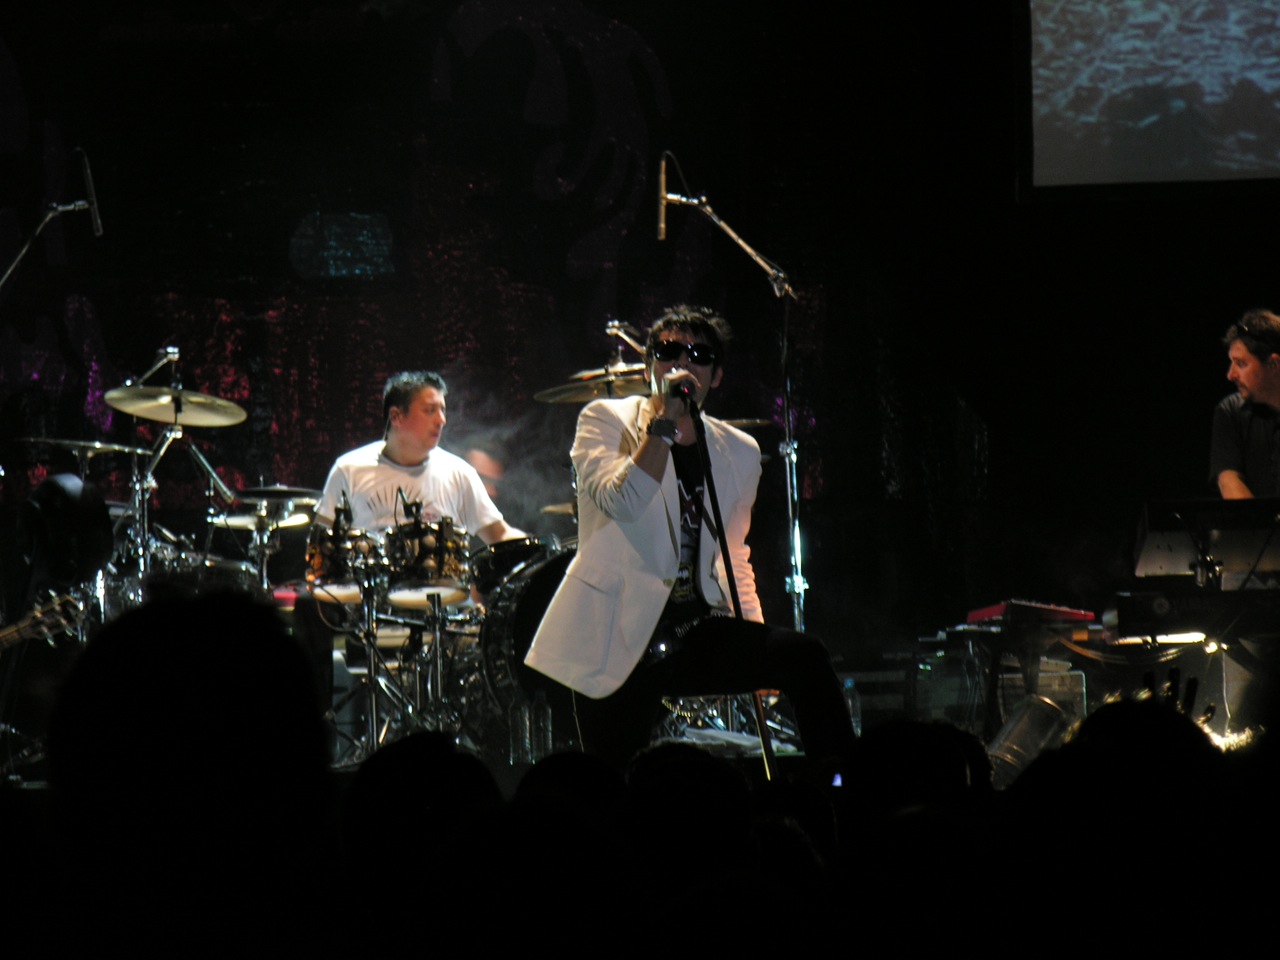 two male and female drummers playing instruments while people watch